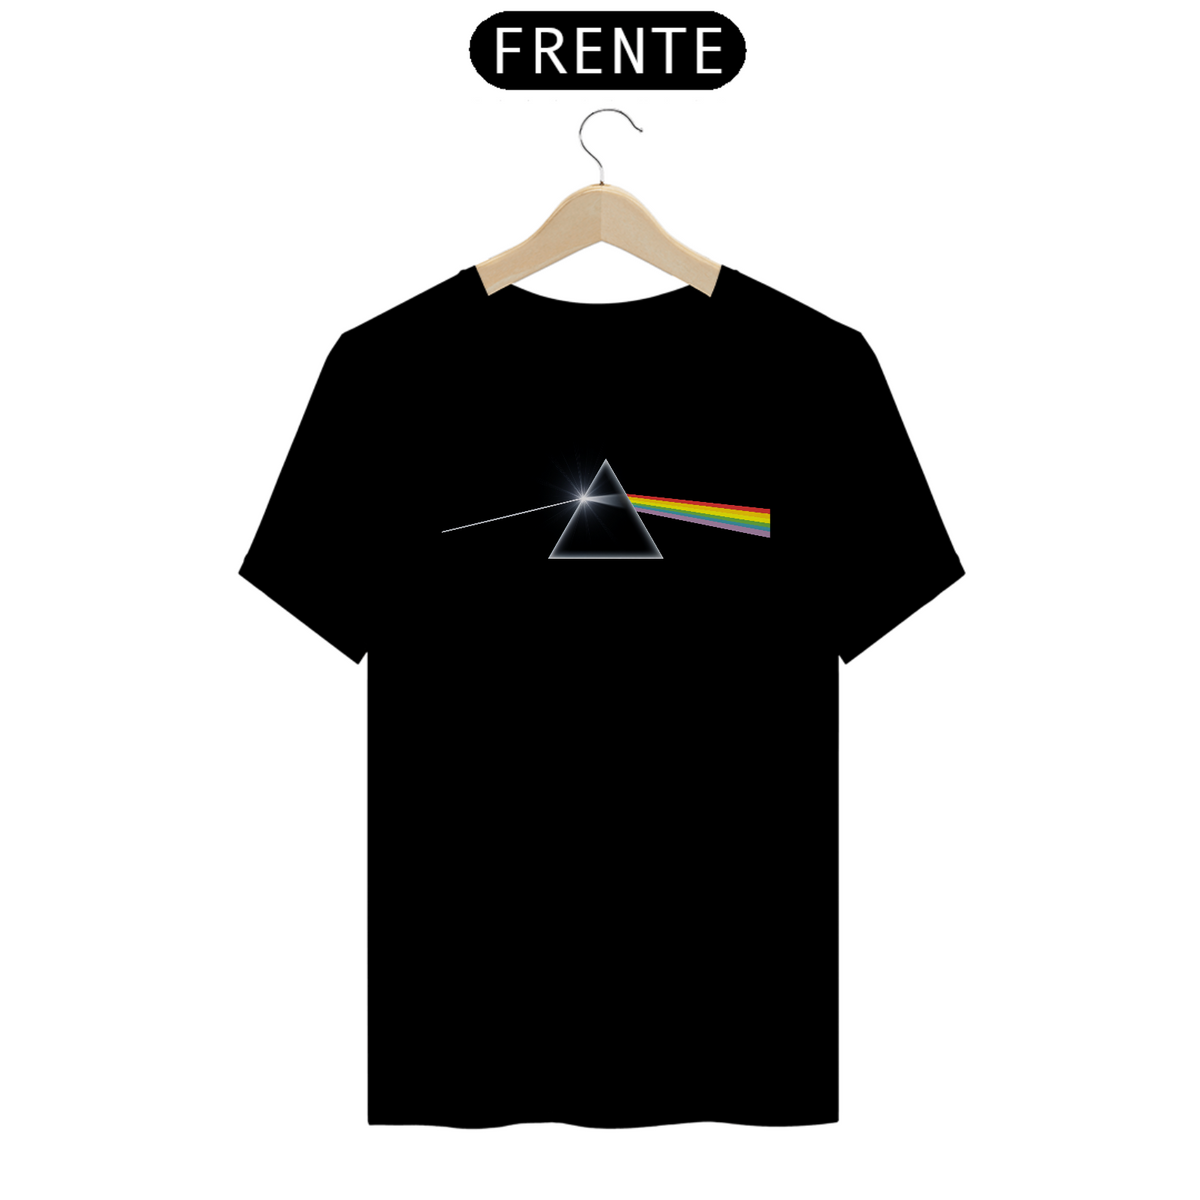 Nome do produto: Dark Side of the moon | Pink Floyd